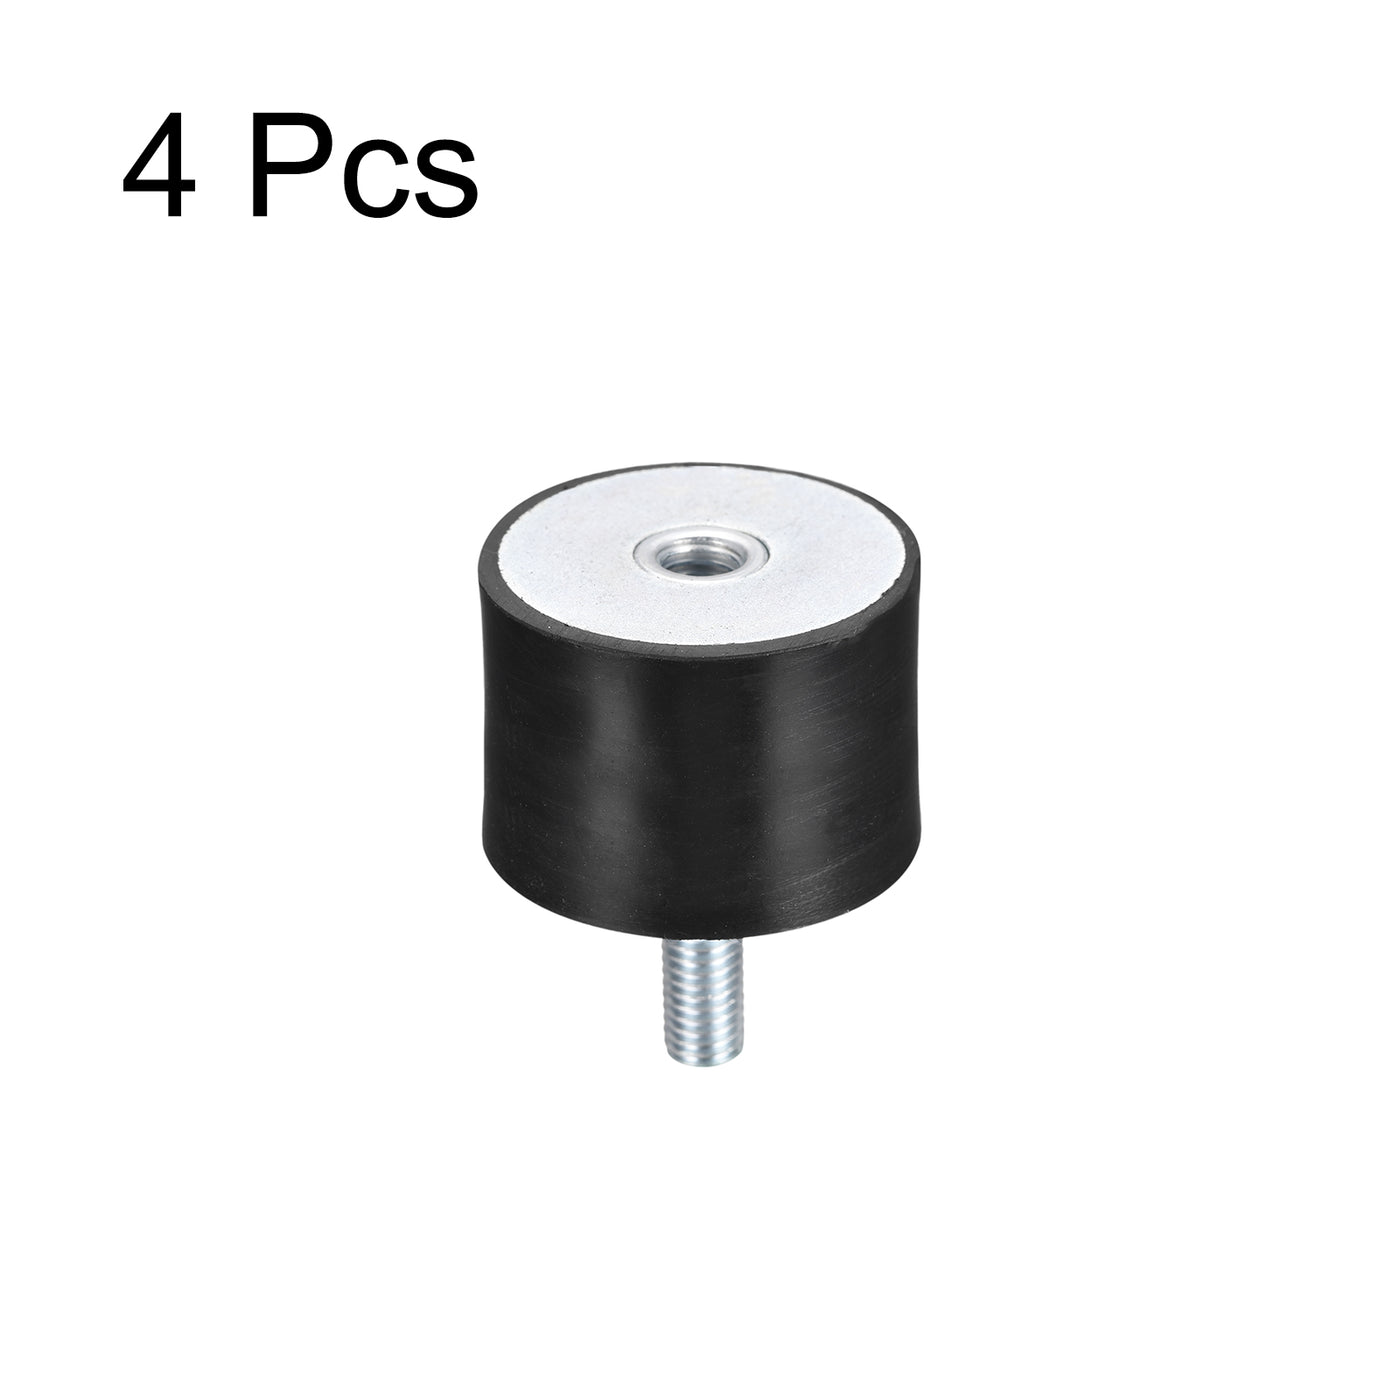 uxcell Uxcell Rubber Mount 4pcs M8 Male/Female Vibration Isolator Shock Absorber D40mmxH30mm